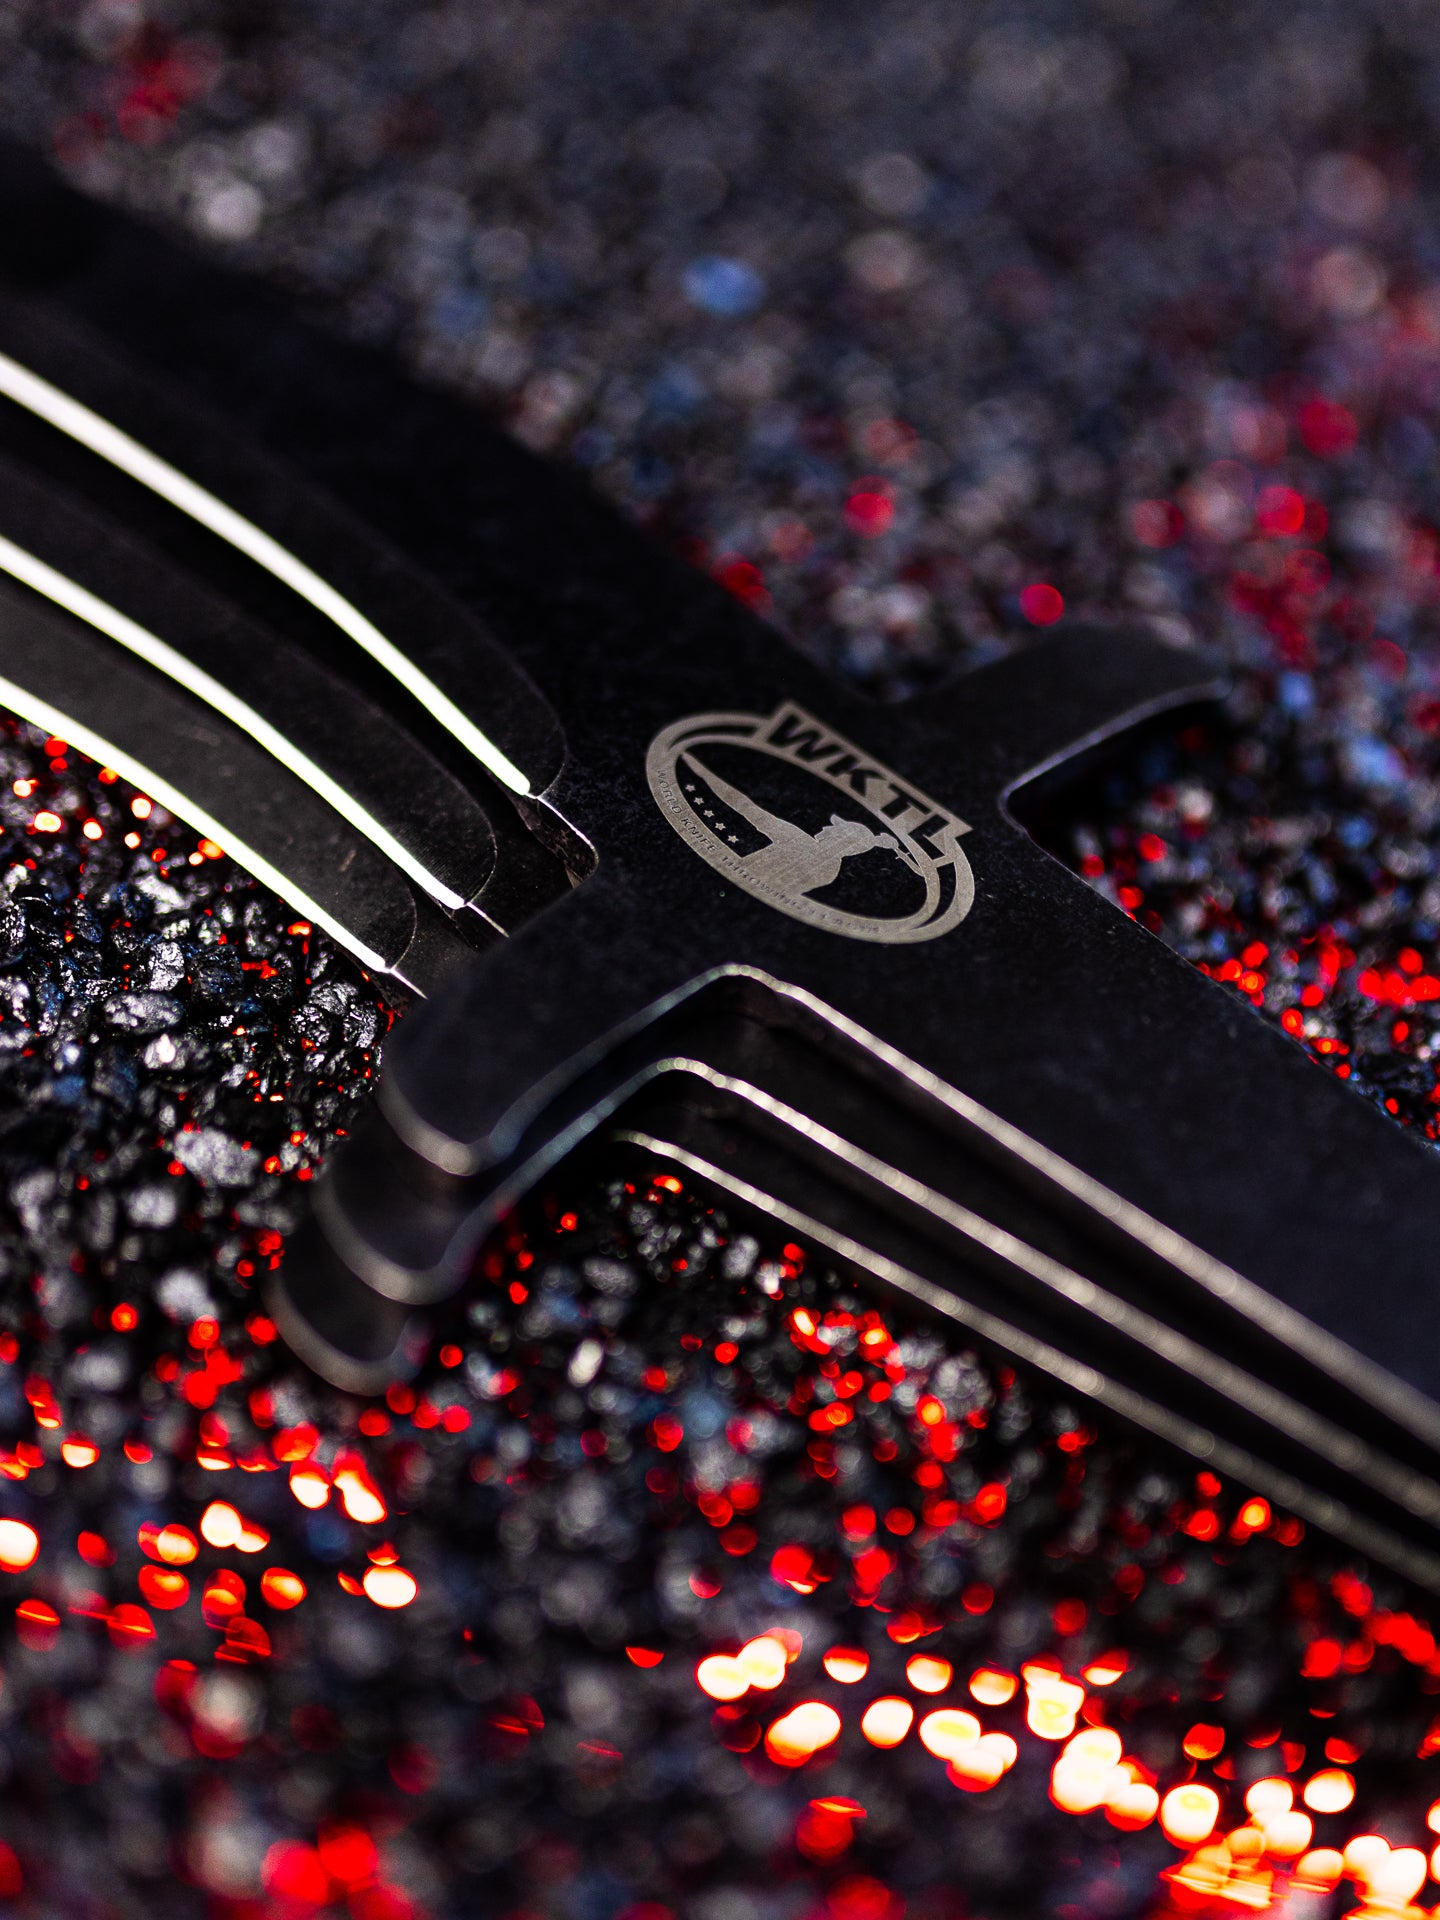 World Knife Throwing League (WKTL) Certified Competition Throwing Knife, The Raptor Guards